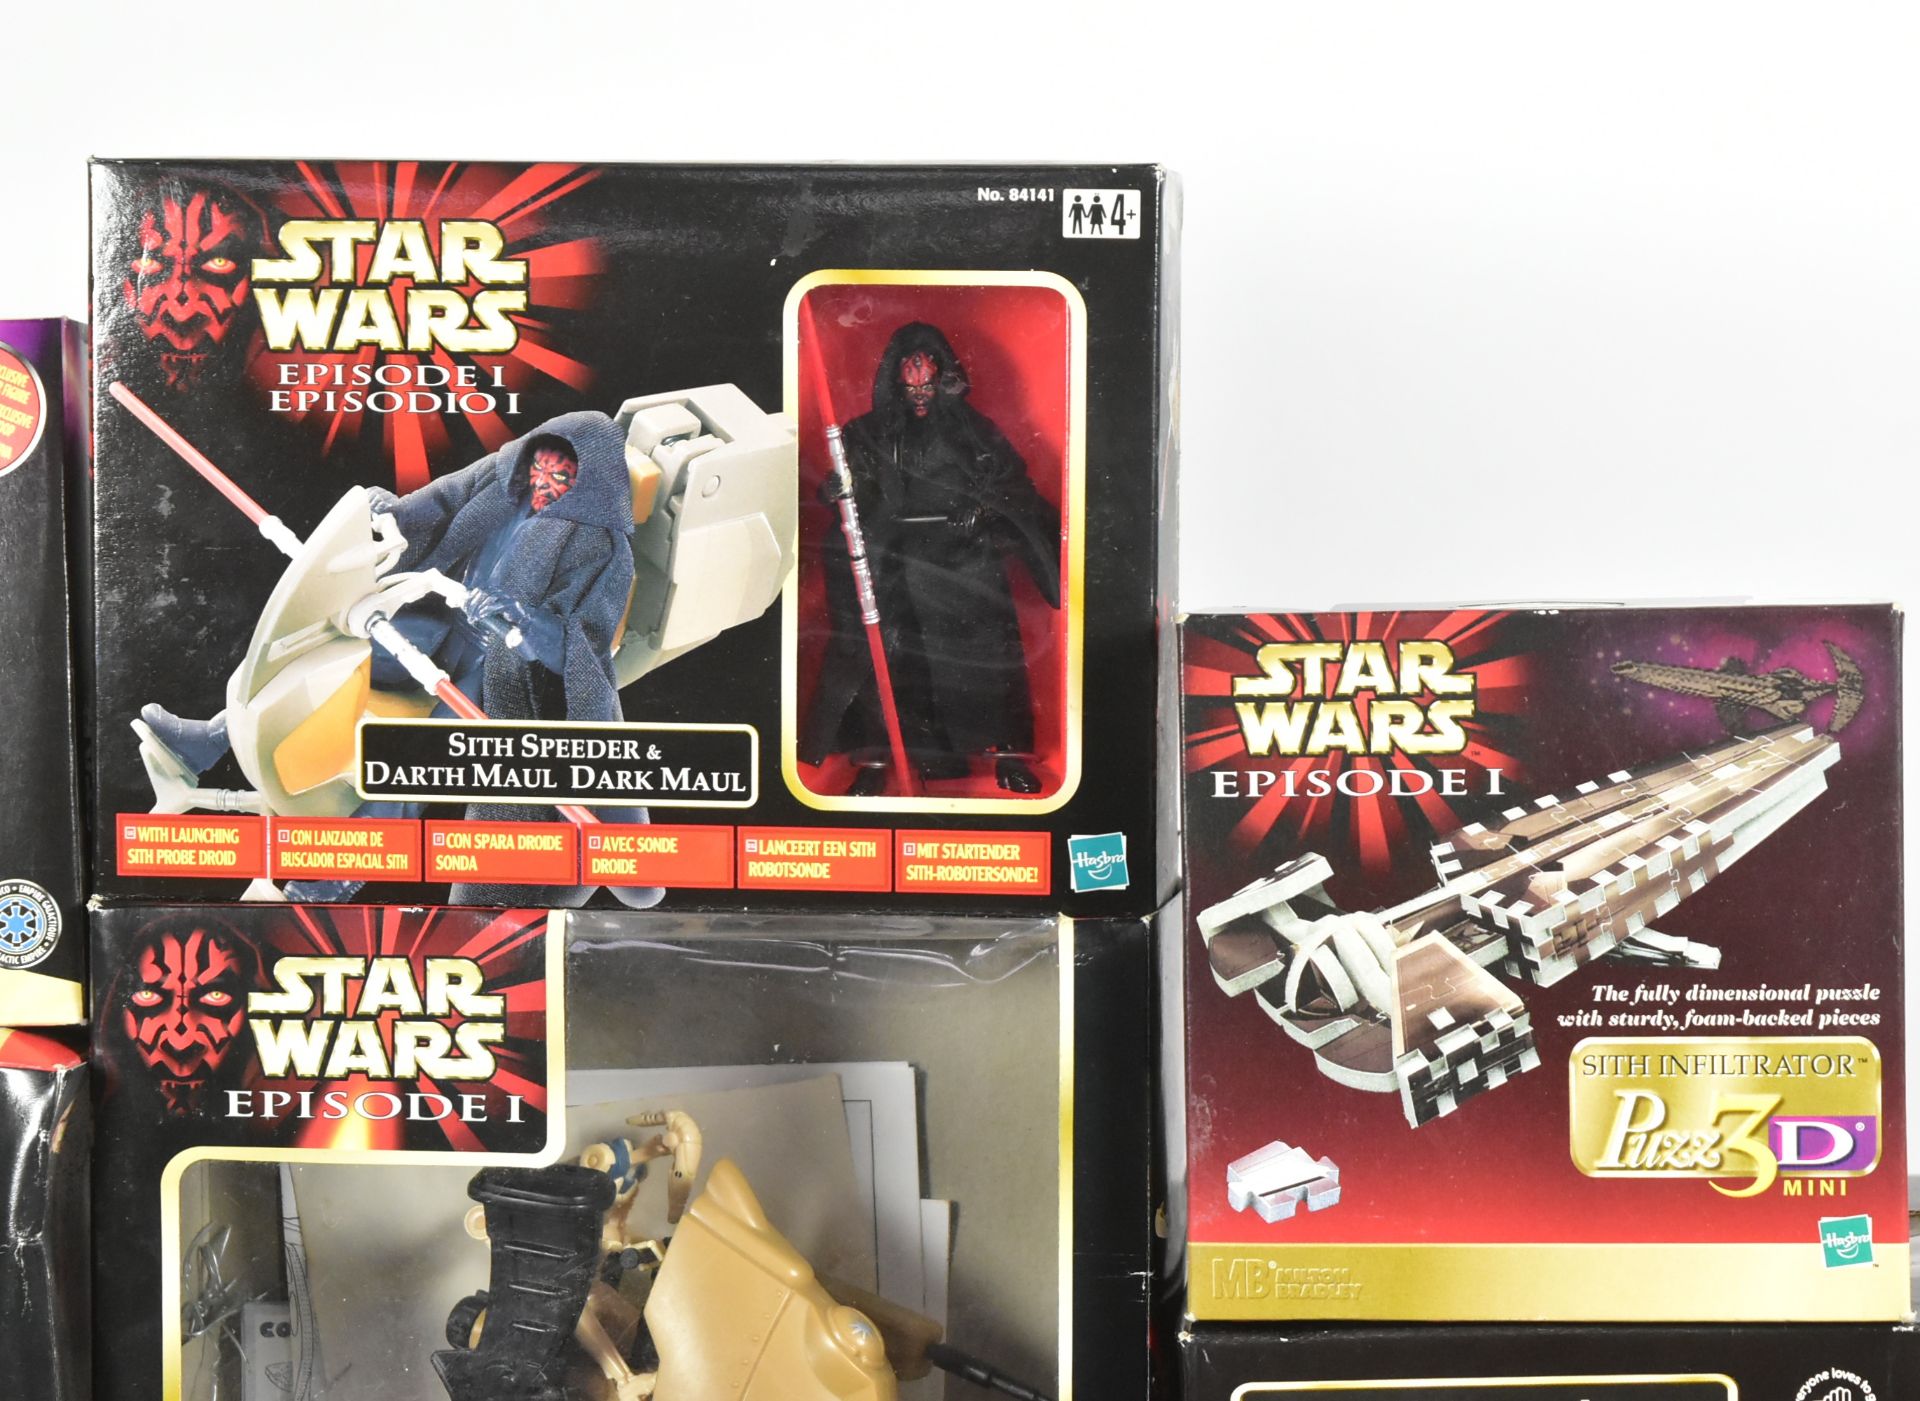 STAR WARS - EPISODE I - HASBRO BOXED ACTION FIGURE PLAYSETS - Image 4 of 6